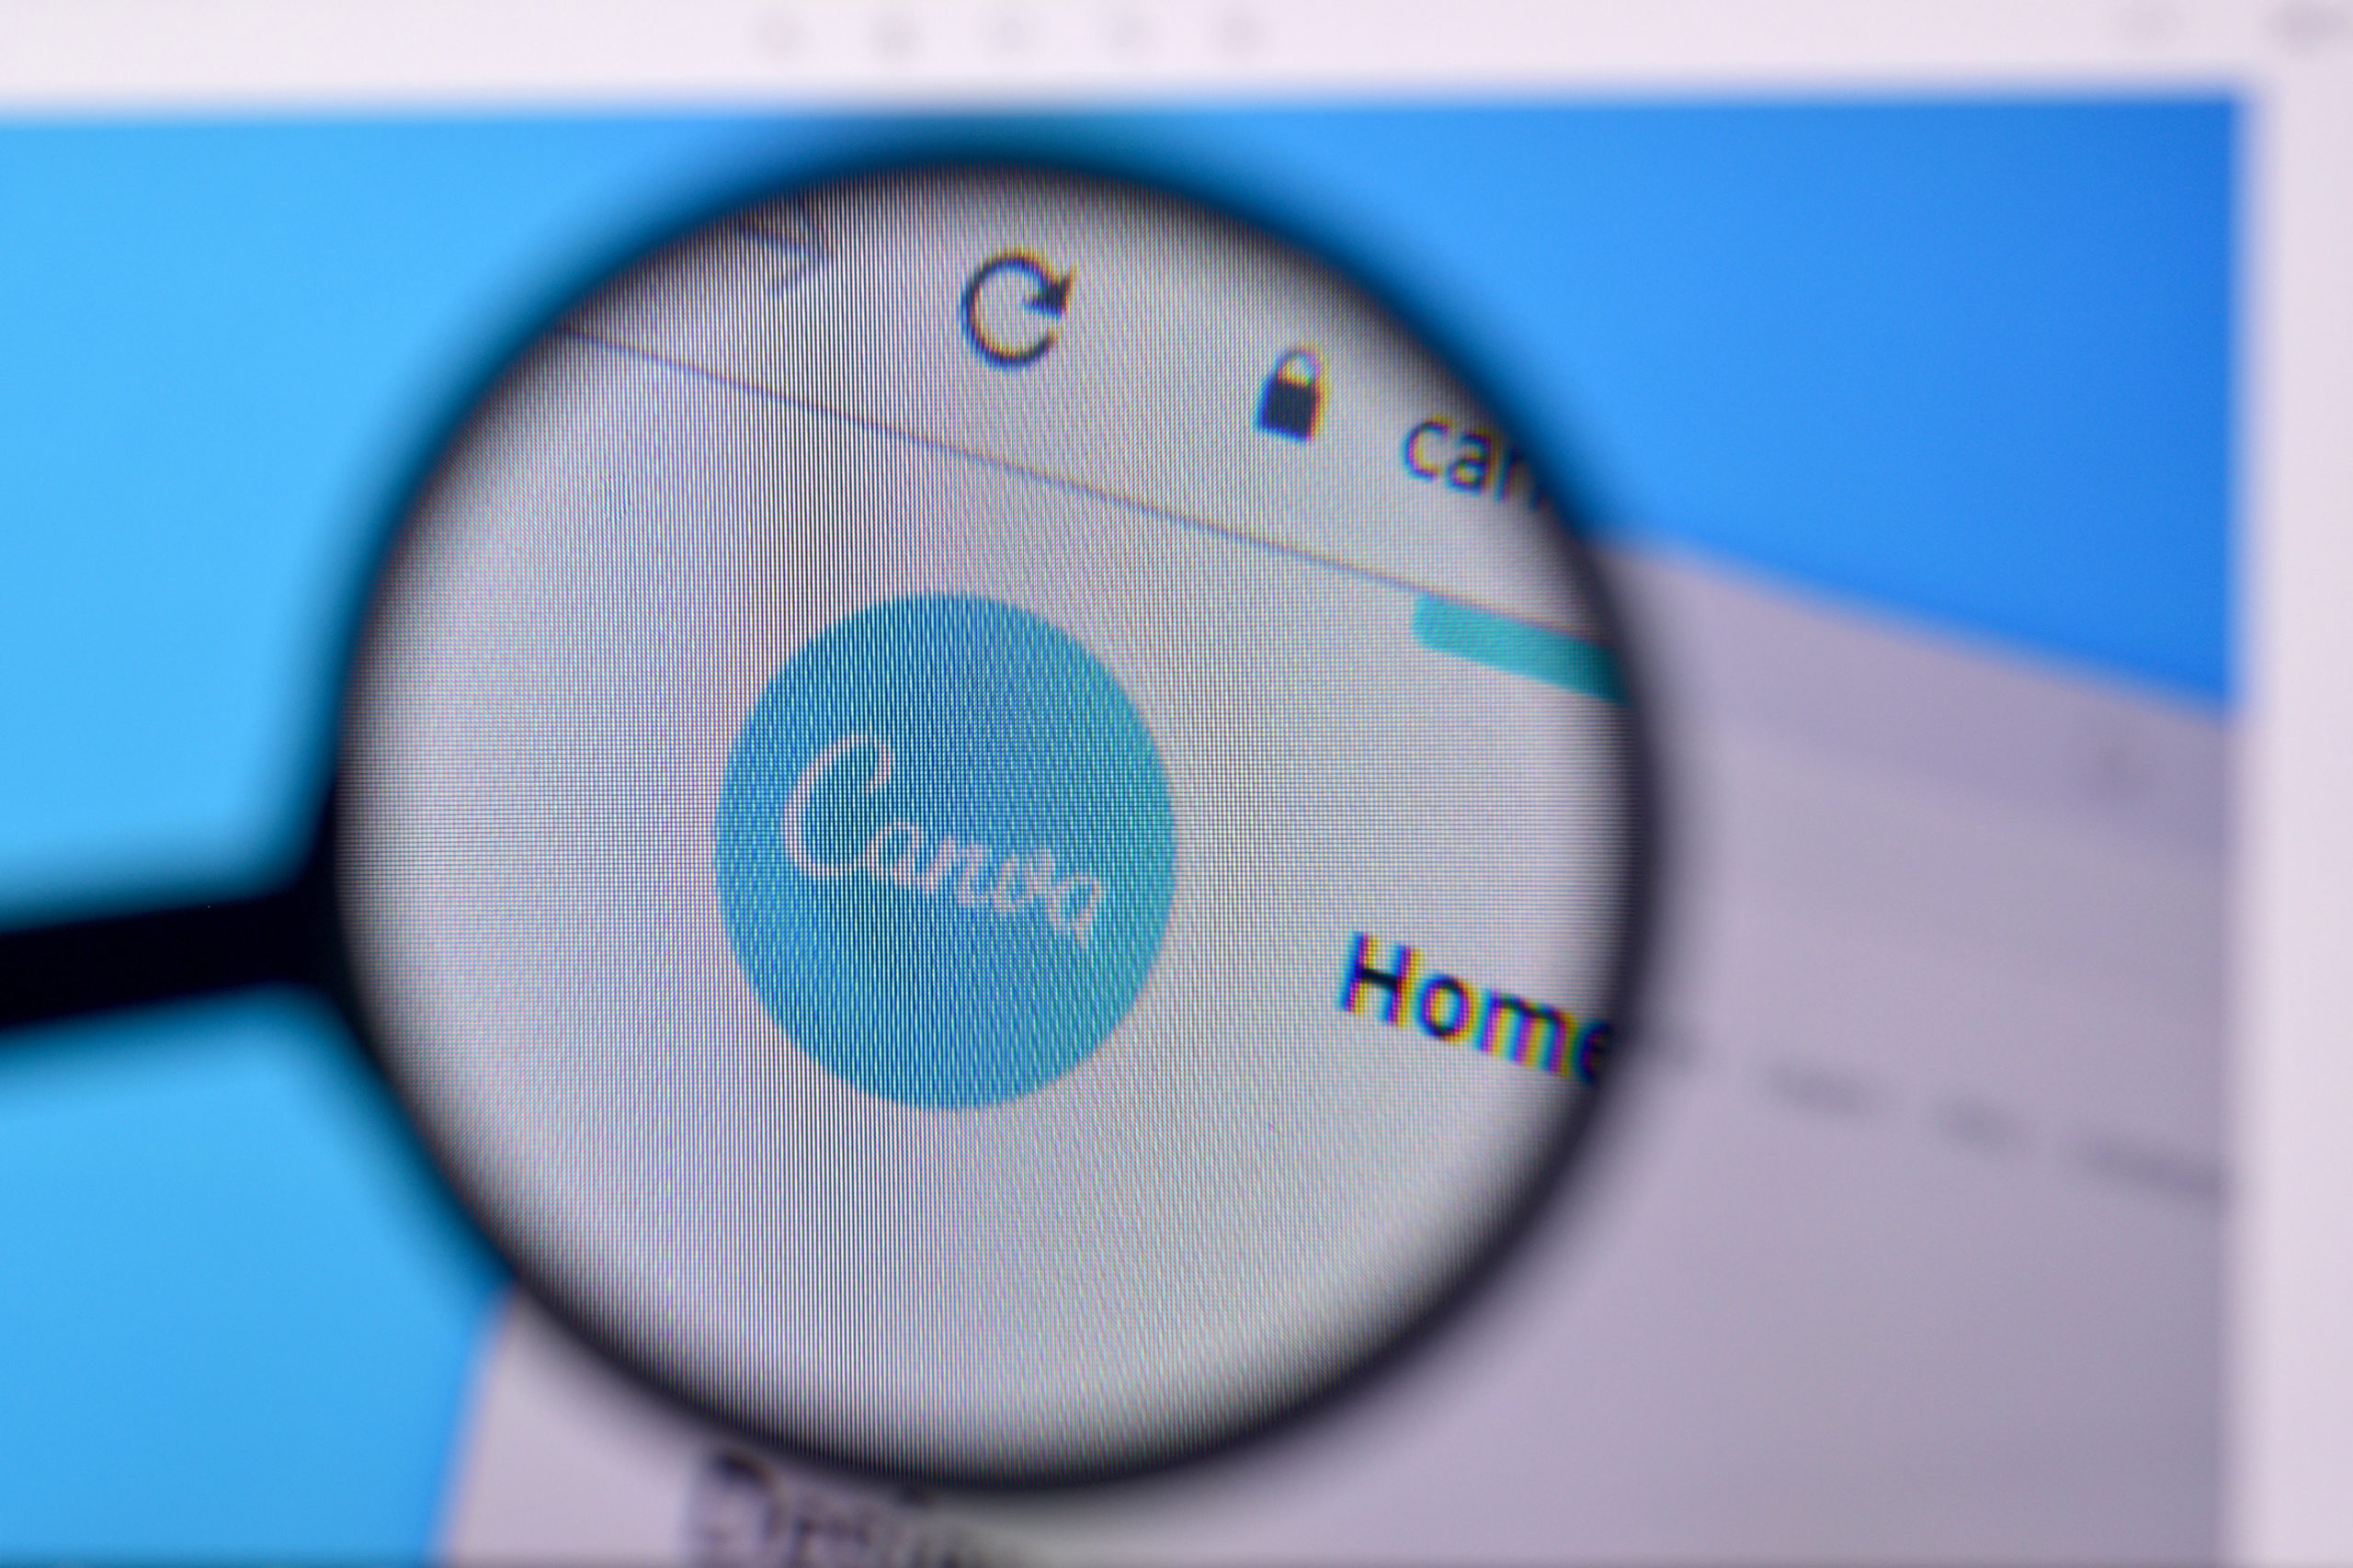 Homepage of canva website on the display of PC, url - canva.com.